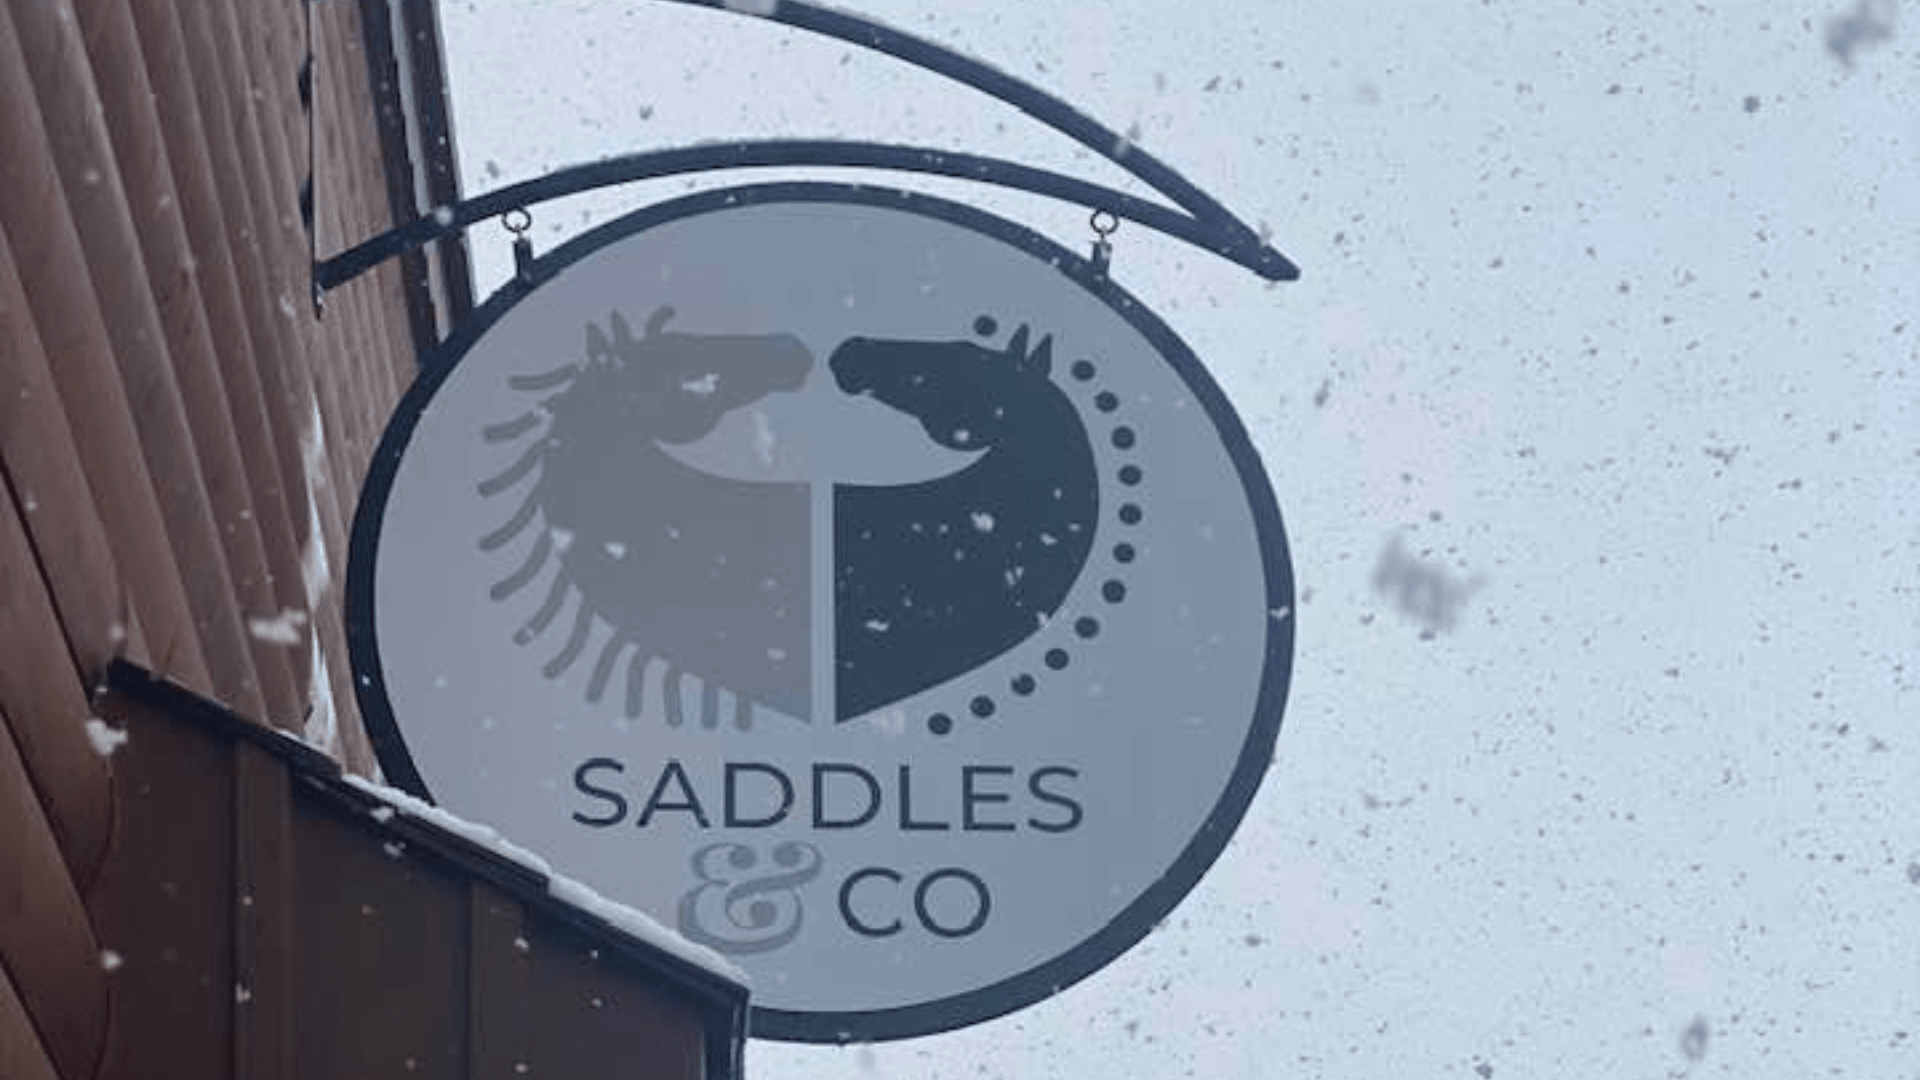 Saddle and Co Store sign